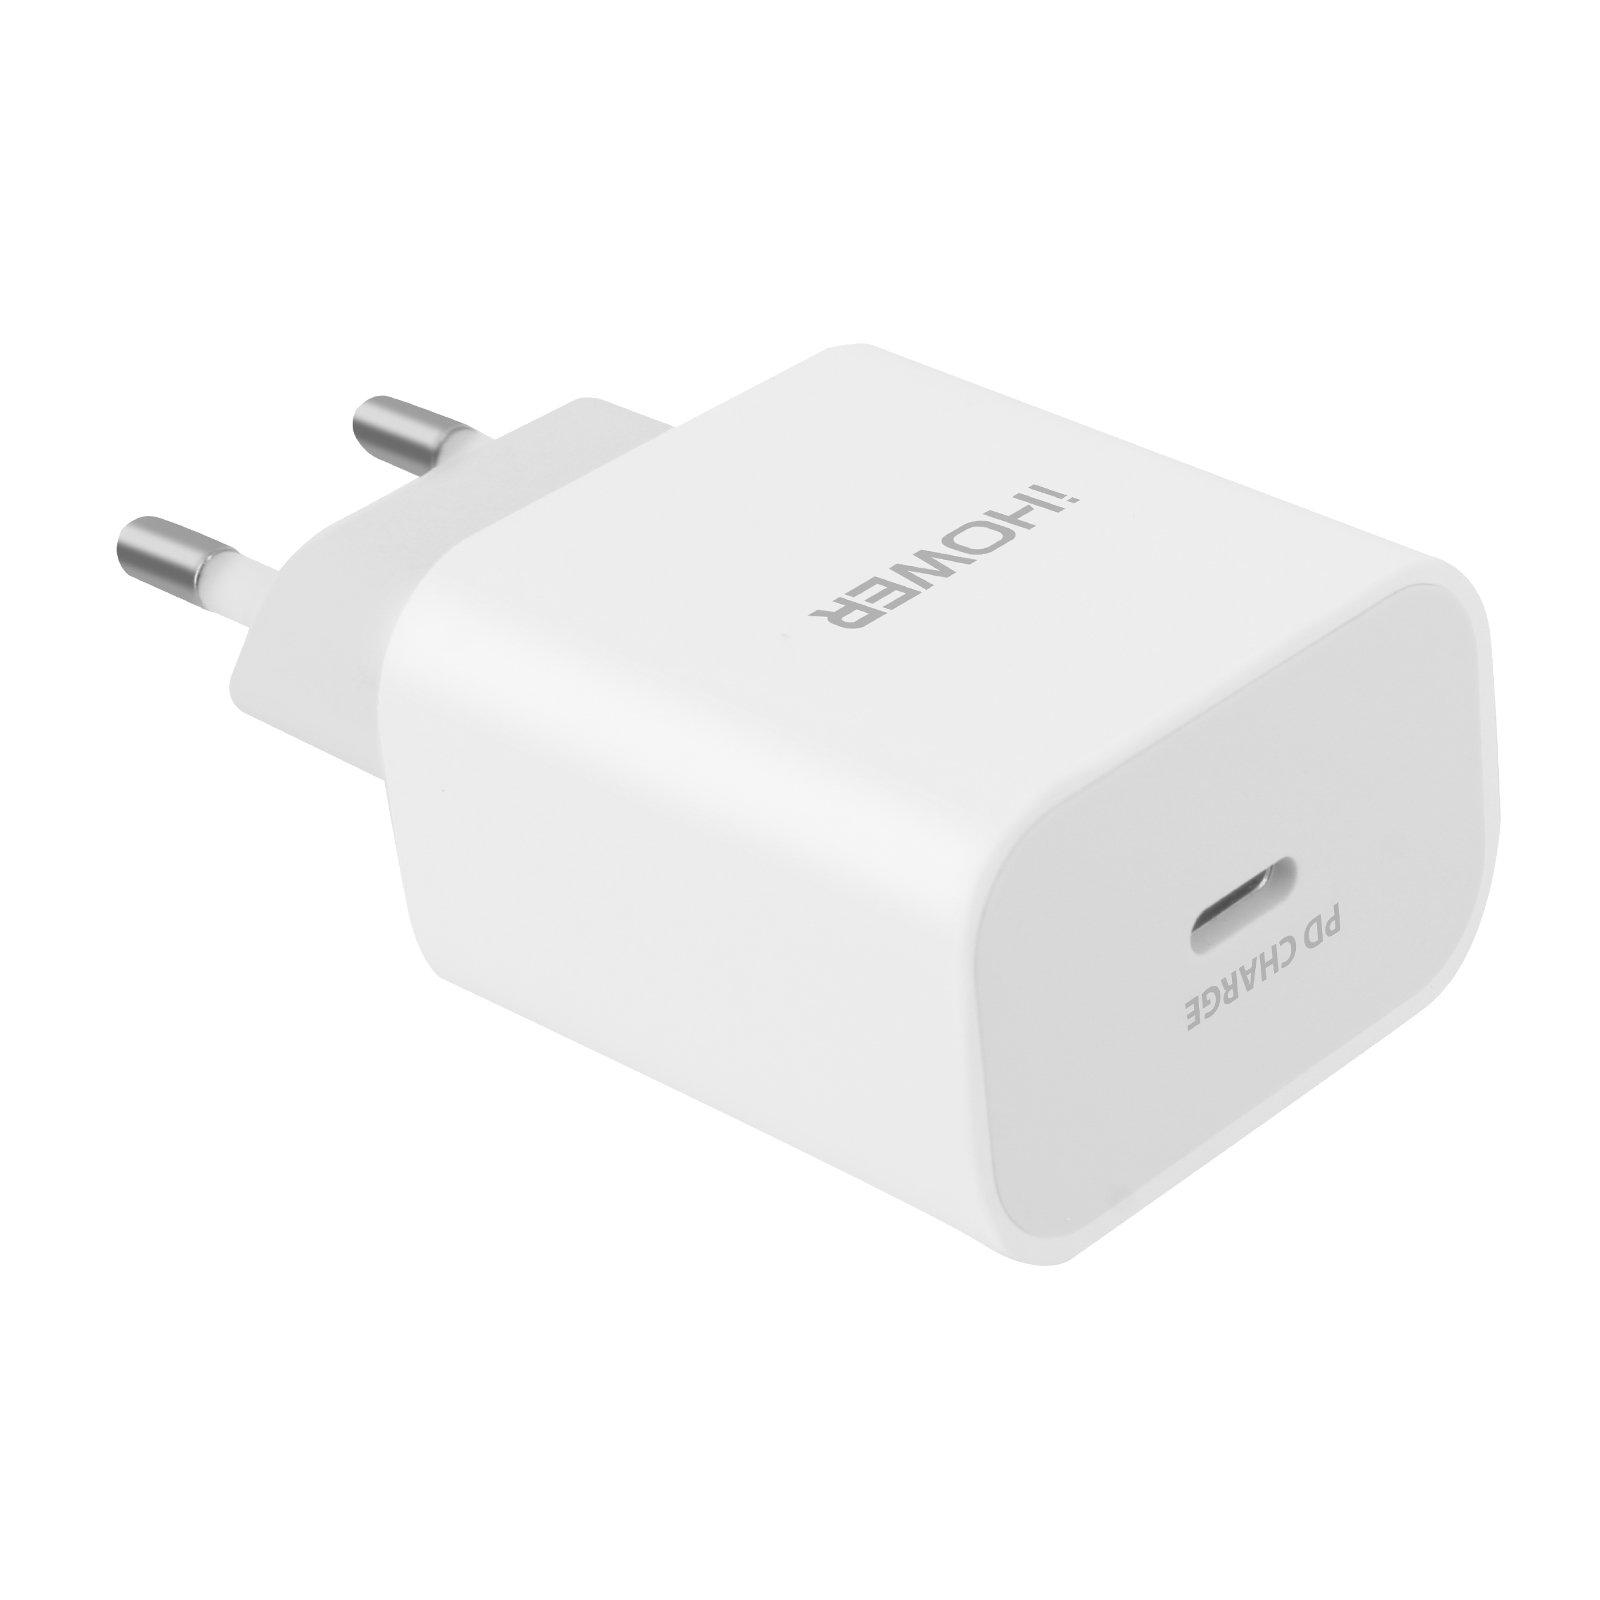 Avizar le USB Type C vers Lightning Power Delivery 20W Charge et